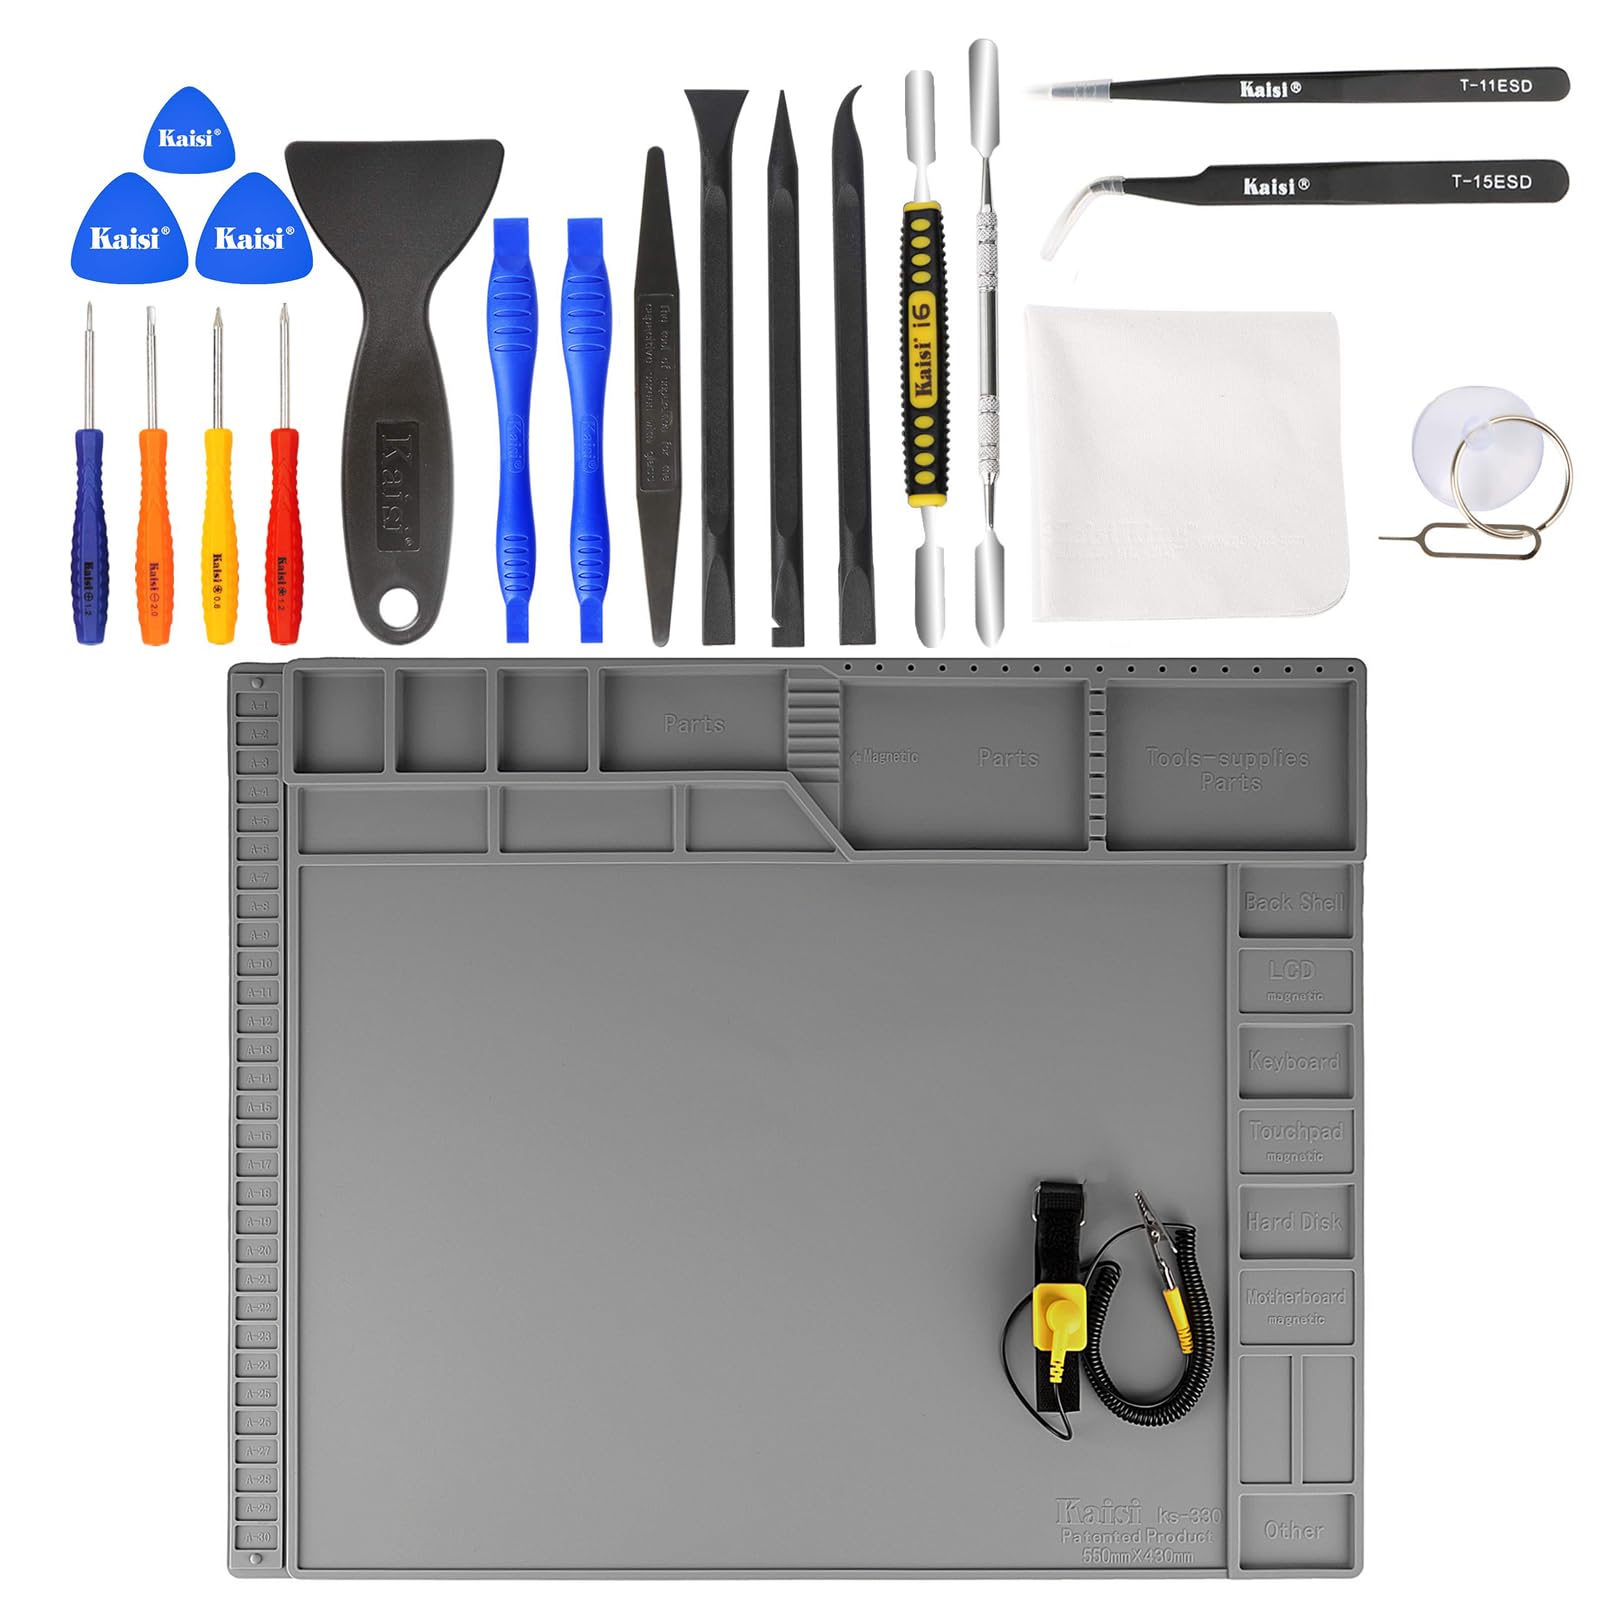 Kaisi Professional Electronics Opening Pry Tool Repair Kit +K330 ILarge Repair Work Mat,Silicone Soldering Mat Nylon Spudgers and Anti-Static Tweezers for Cellphone iPhone Laptops Tablets and More